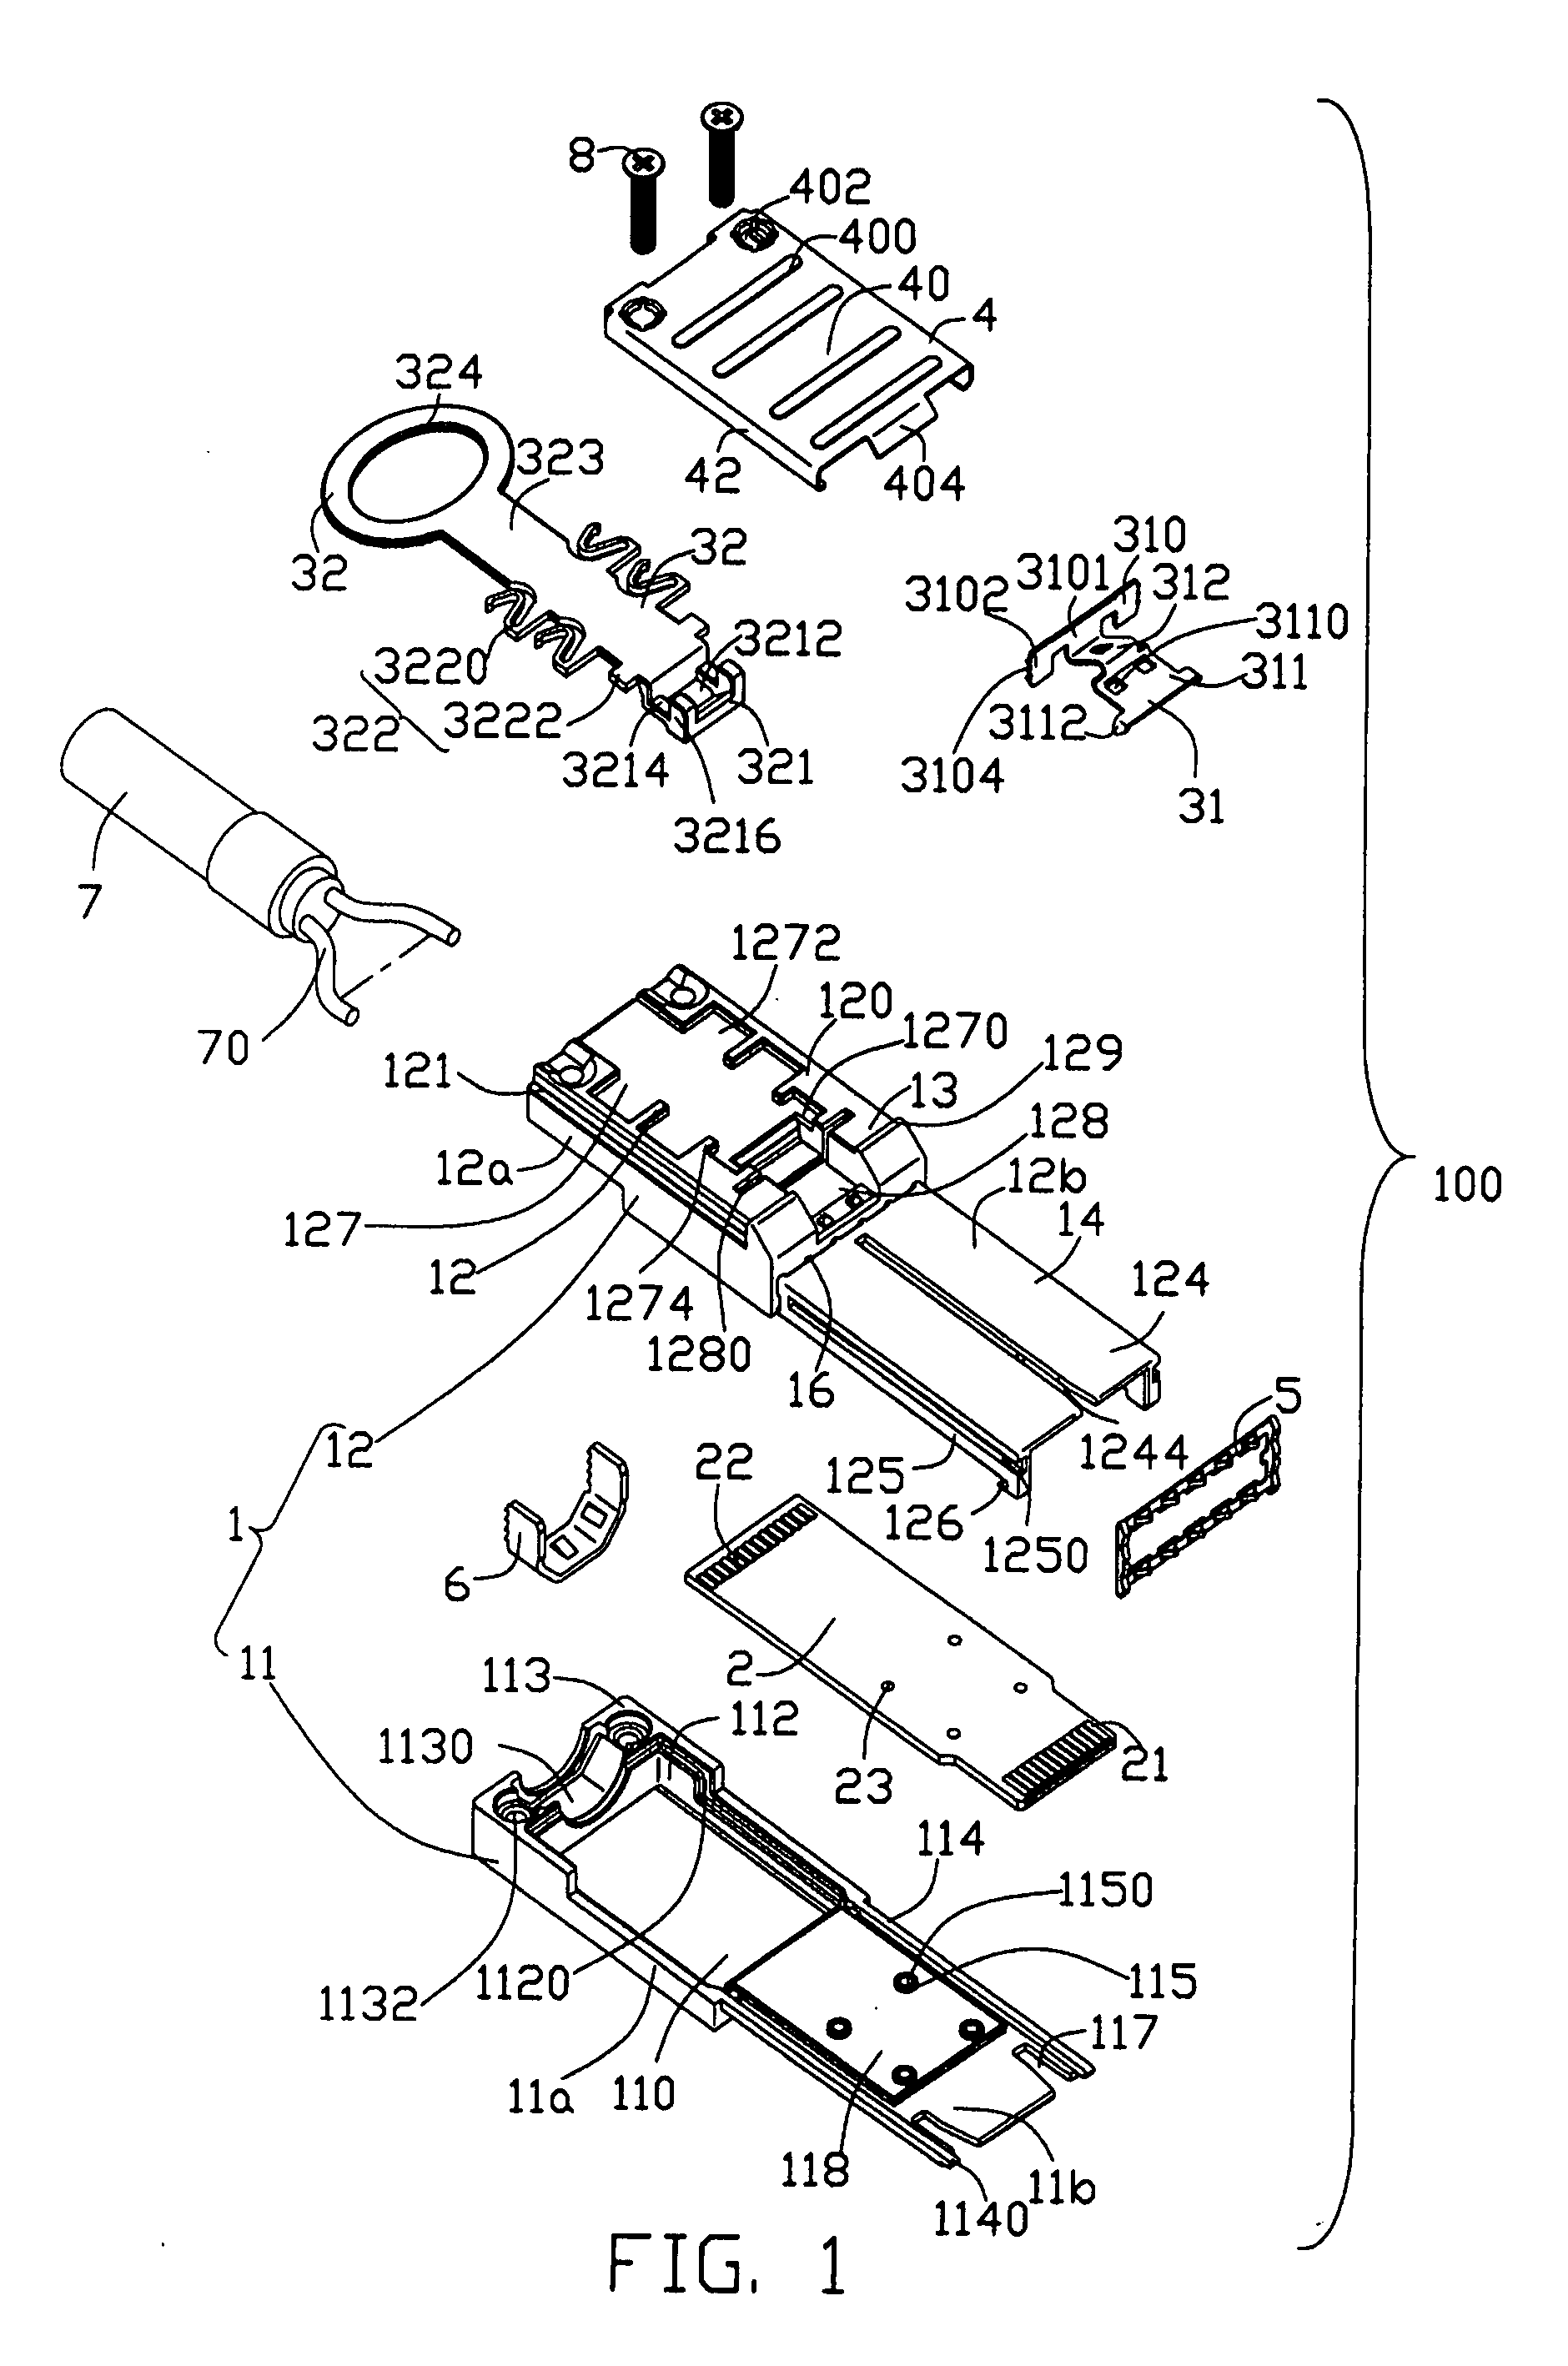 Plug connector with latching mechanism